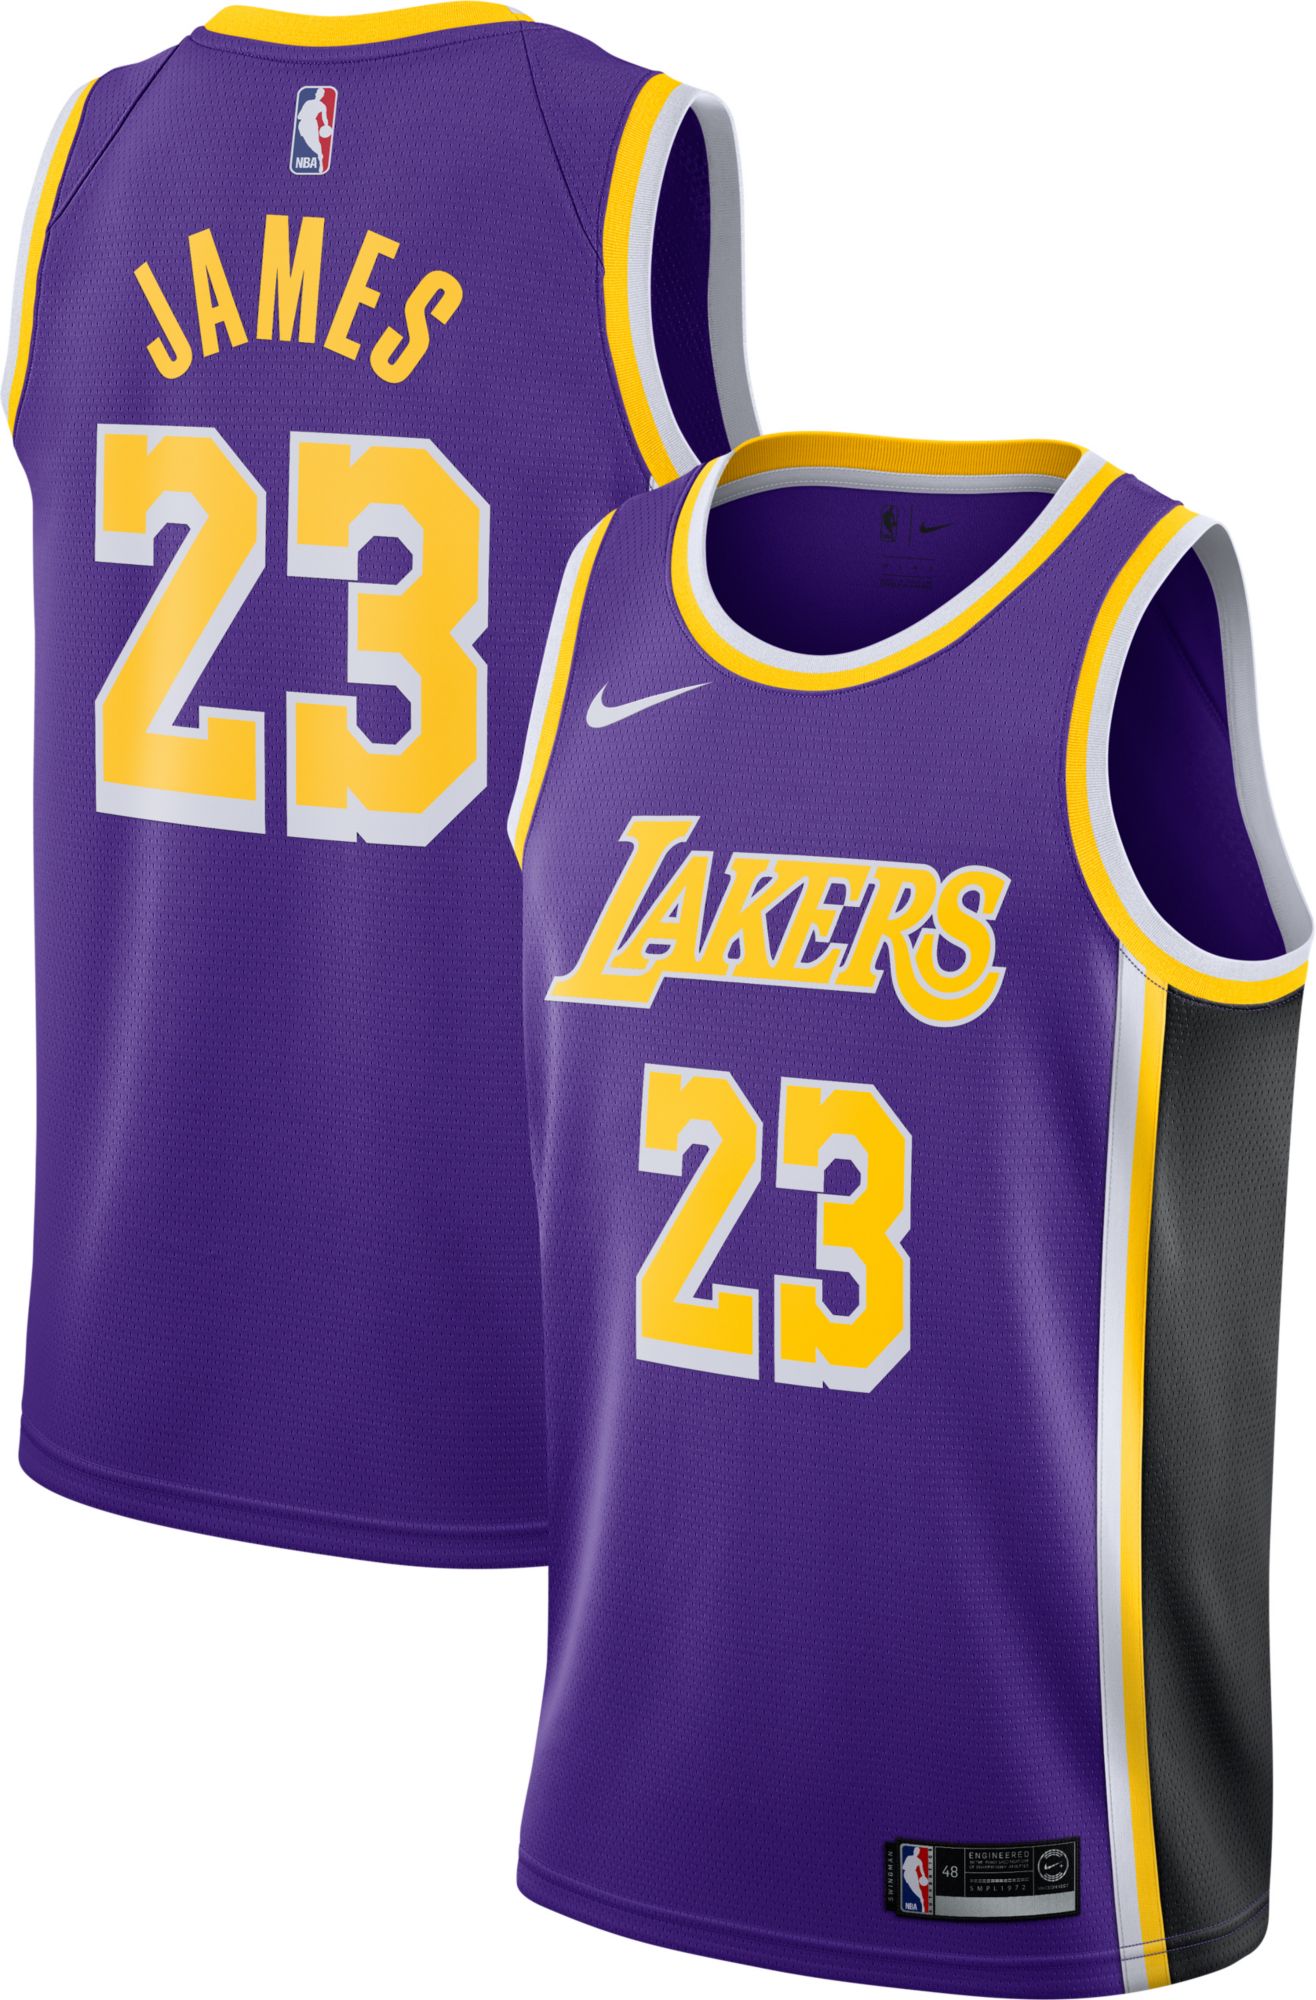 4t lebron james lakers jersey Off 62% - www.bashhguidelines.org